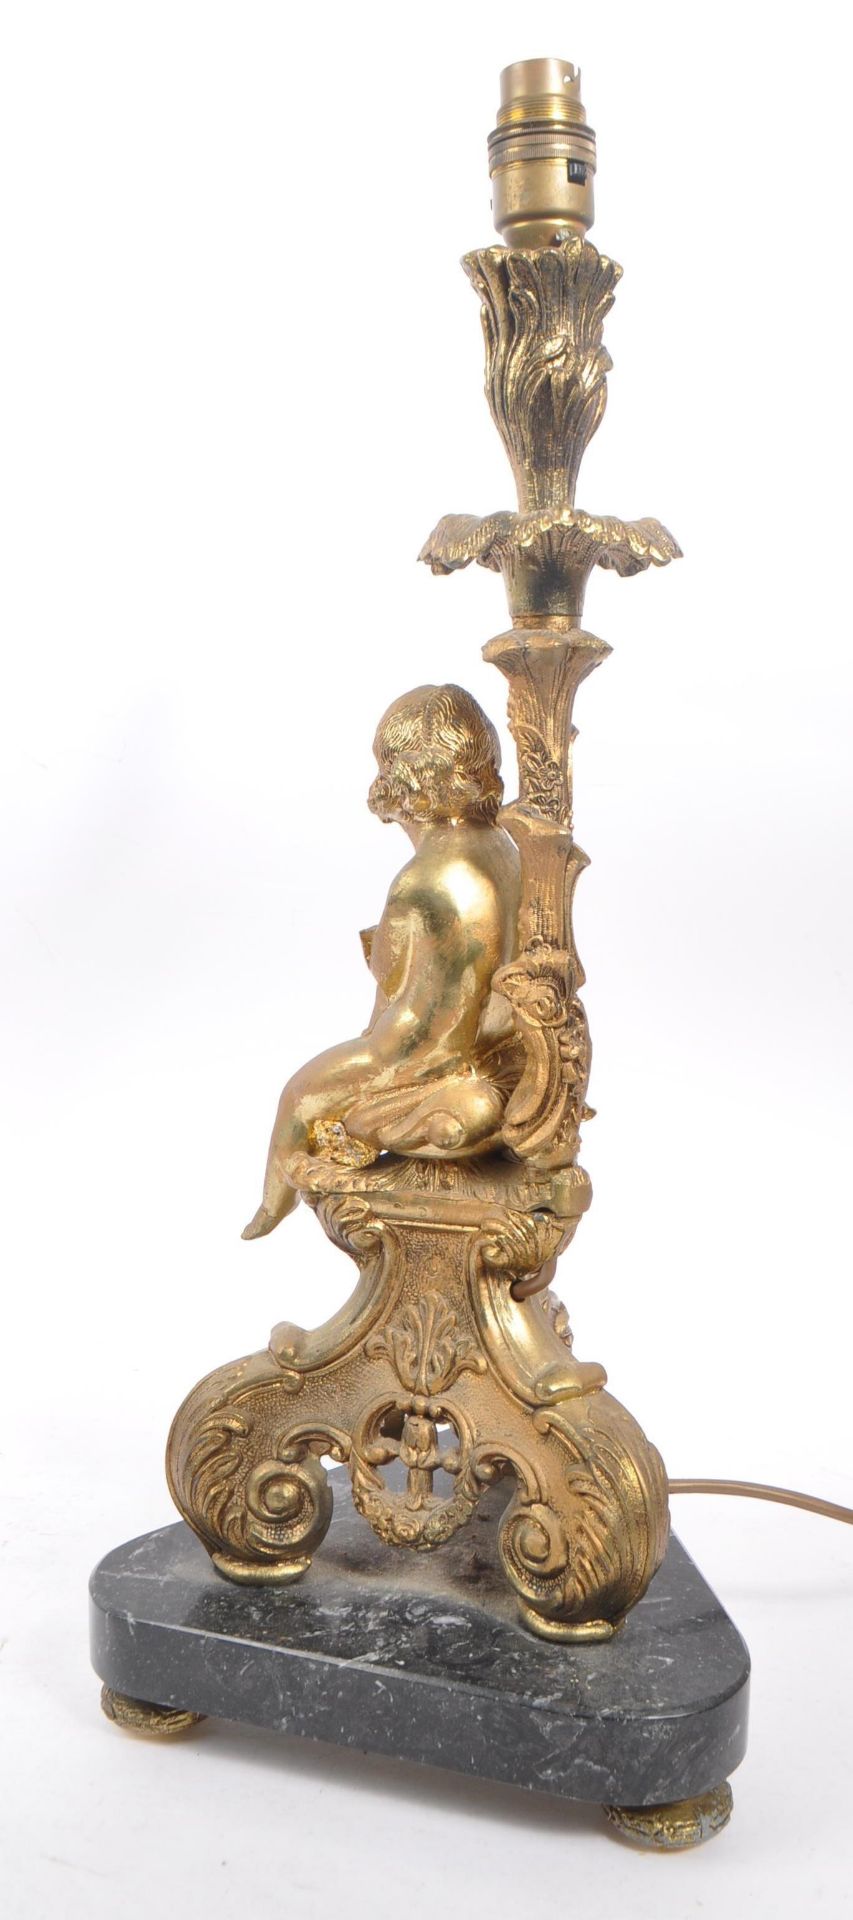 EARLY 20TH CENTURY NEOCLASSICAL GILT TABLE LAMP - Image 4 of 7